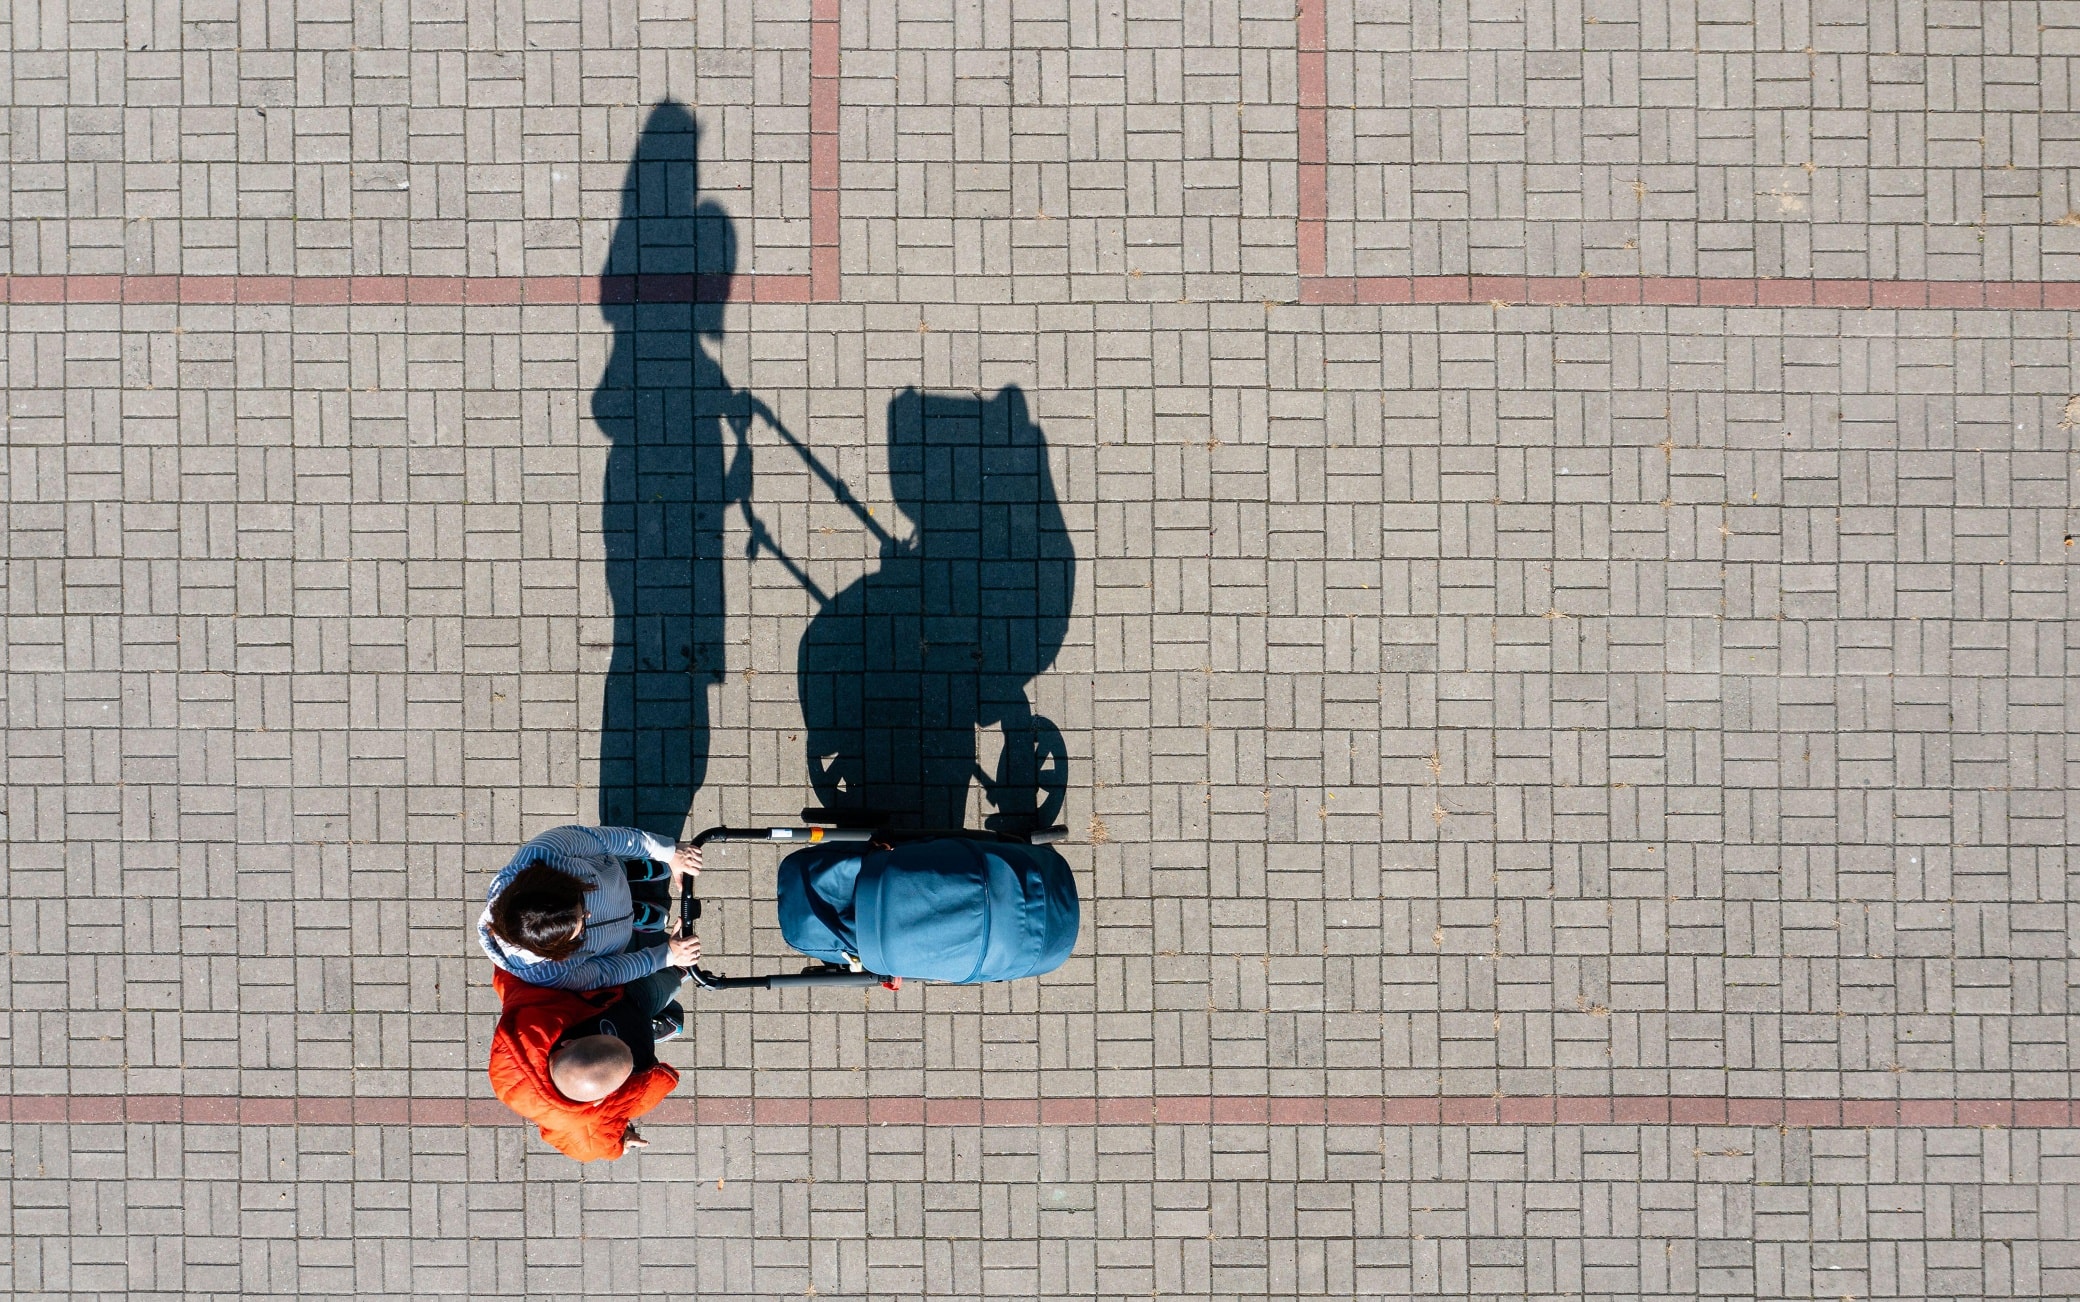 Aerial view of parent with a stroller on a walk during sunny day, perspective directly above